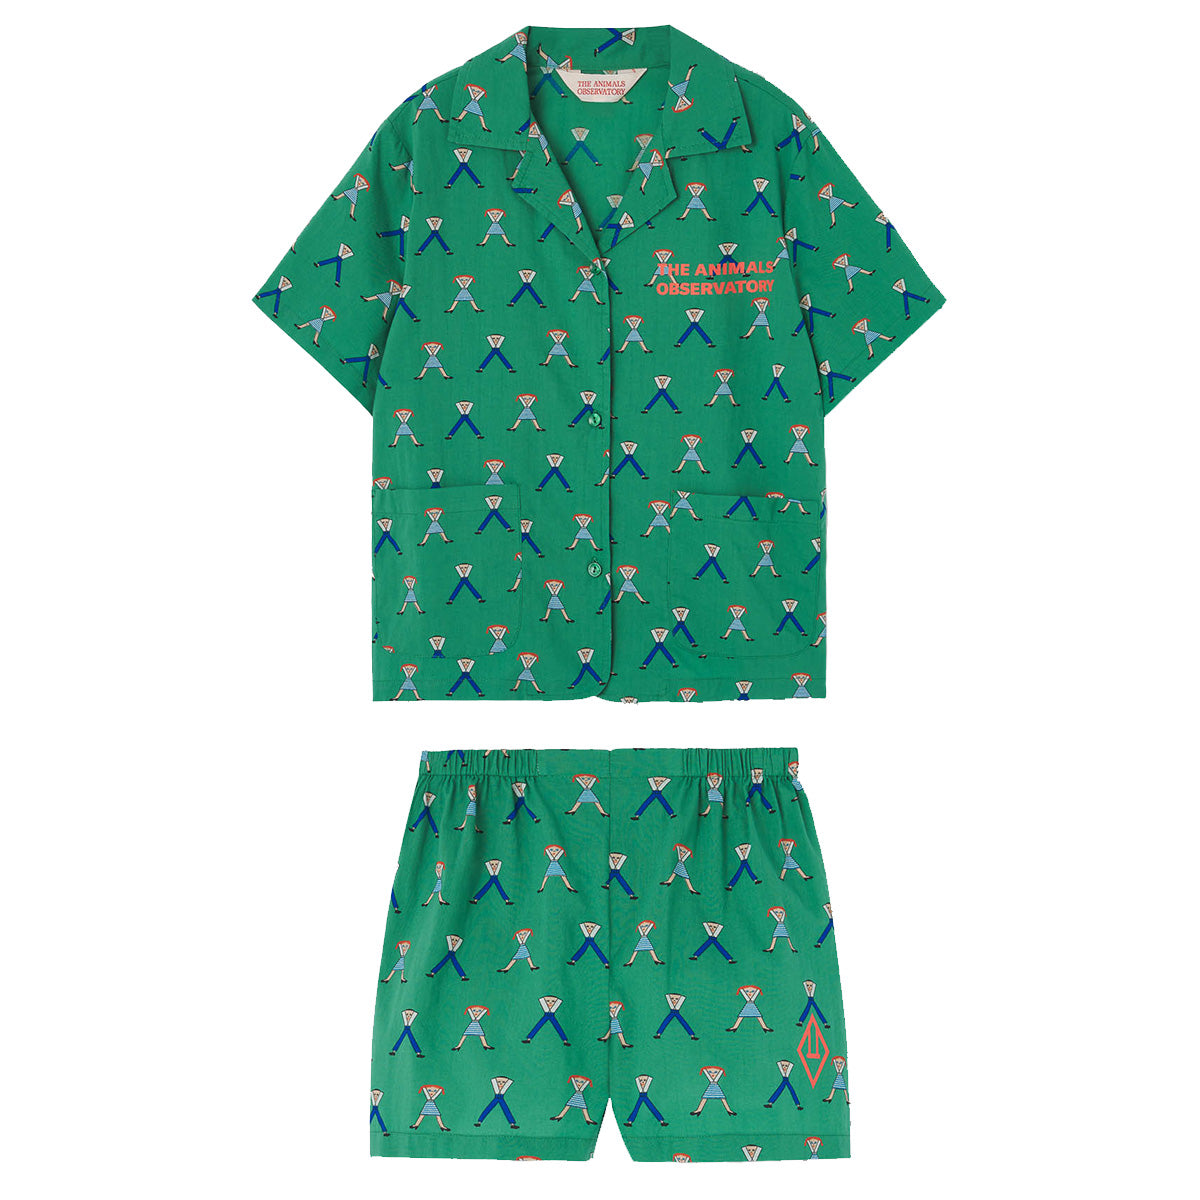 The Magpie Two Piece from The Animals Observatory in green color and a regular fit includes a short-sleeved shirt